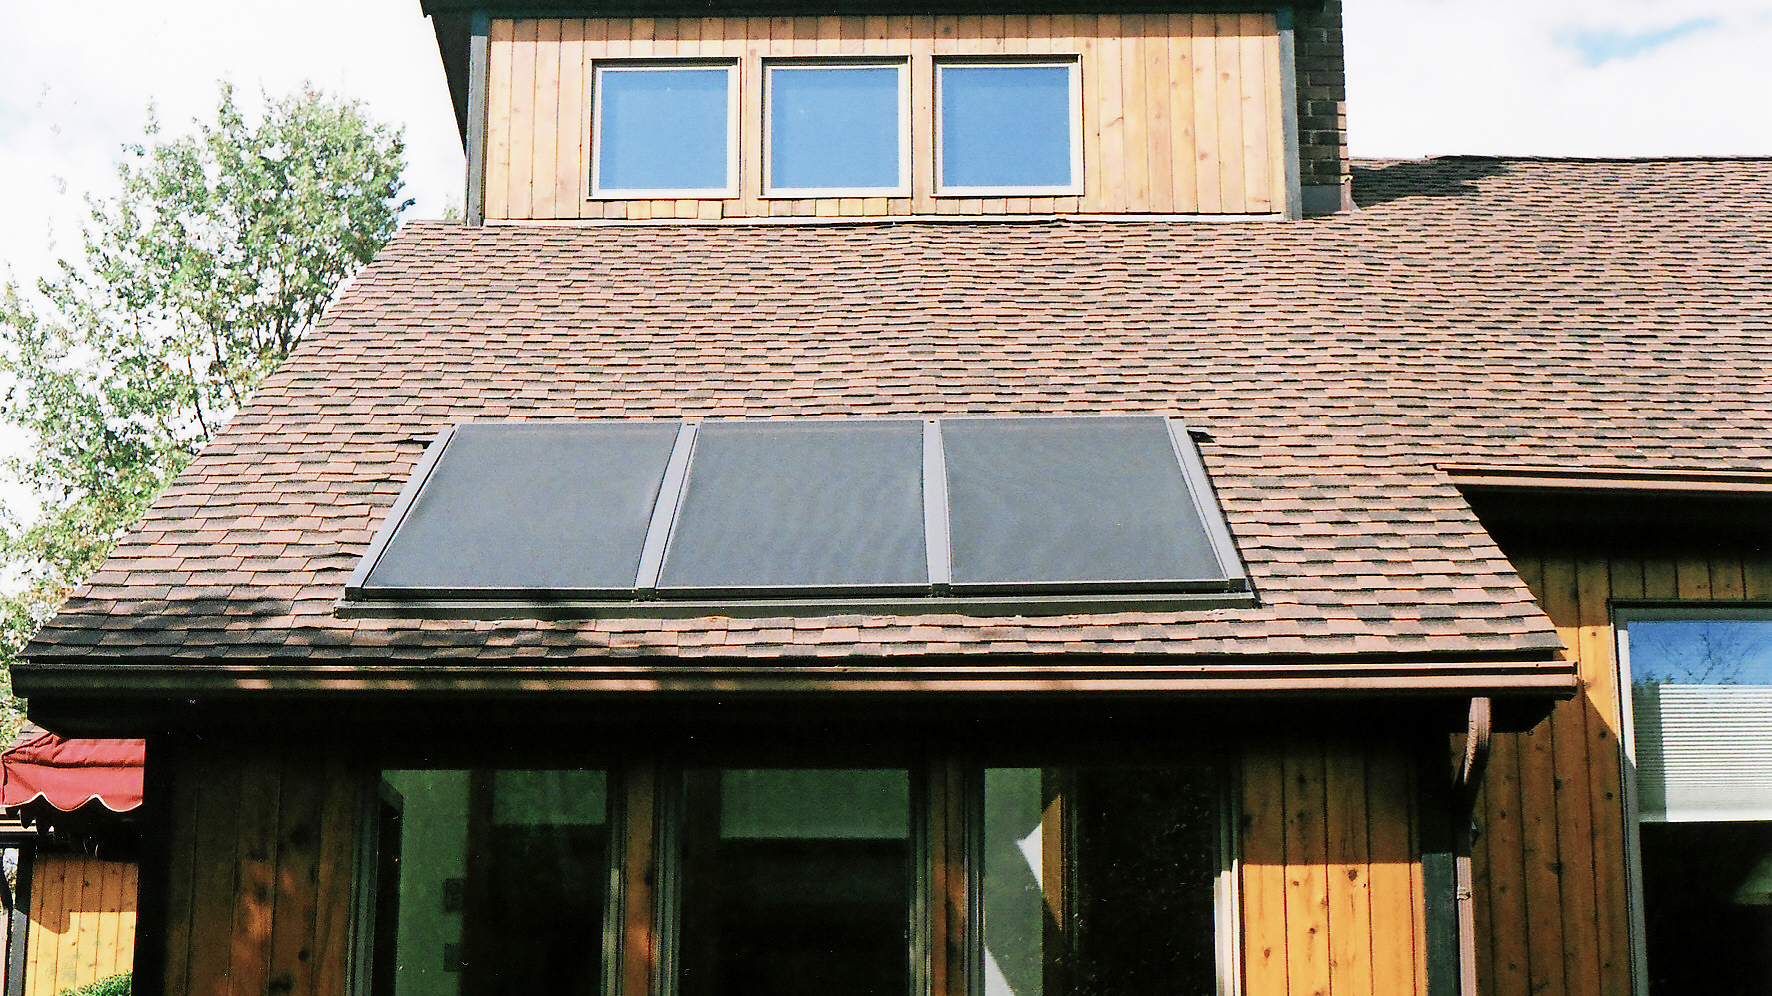 Flat skylight with removable shades using the FGS system